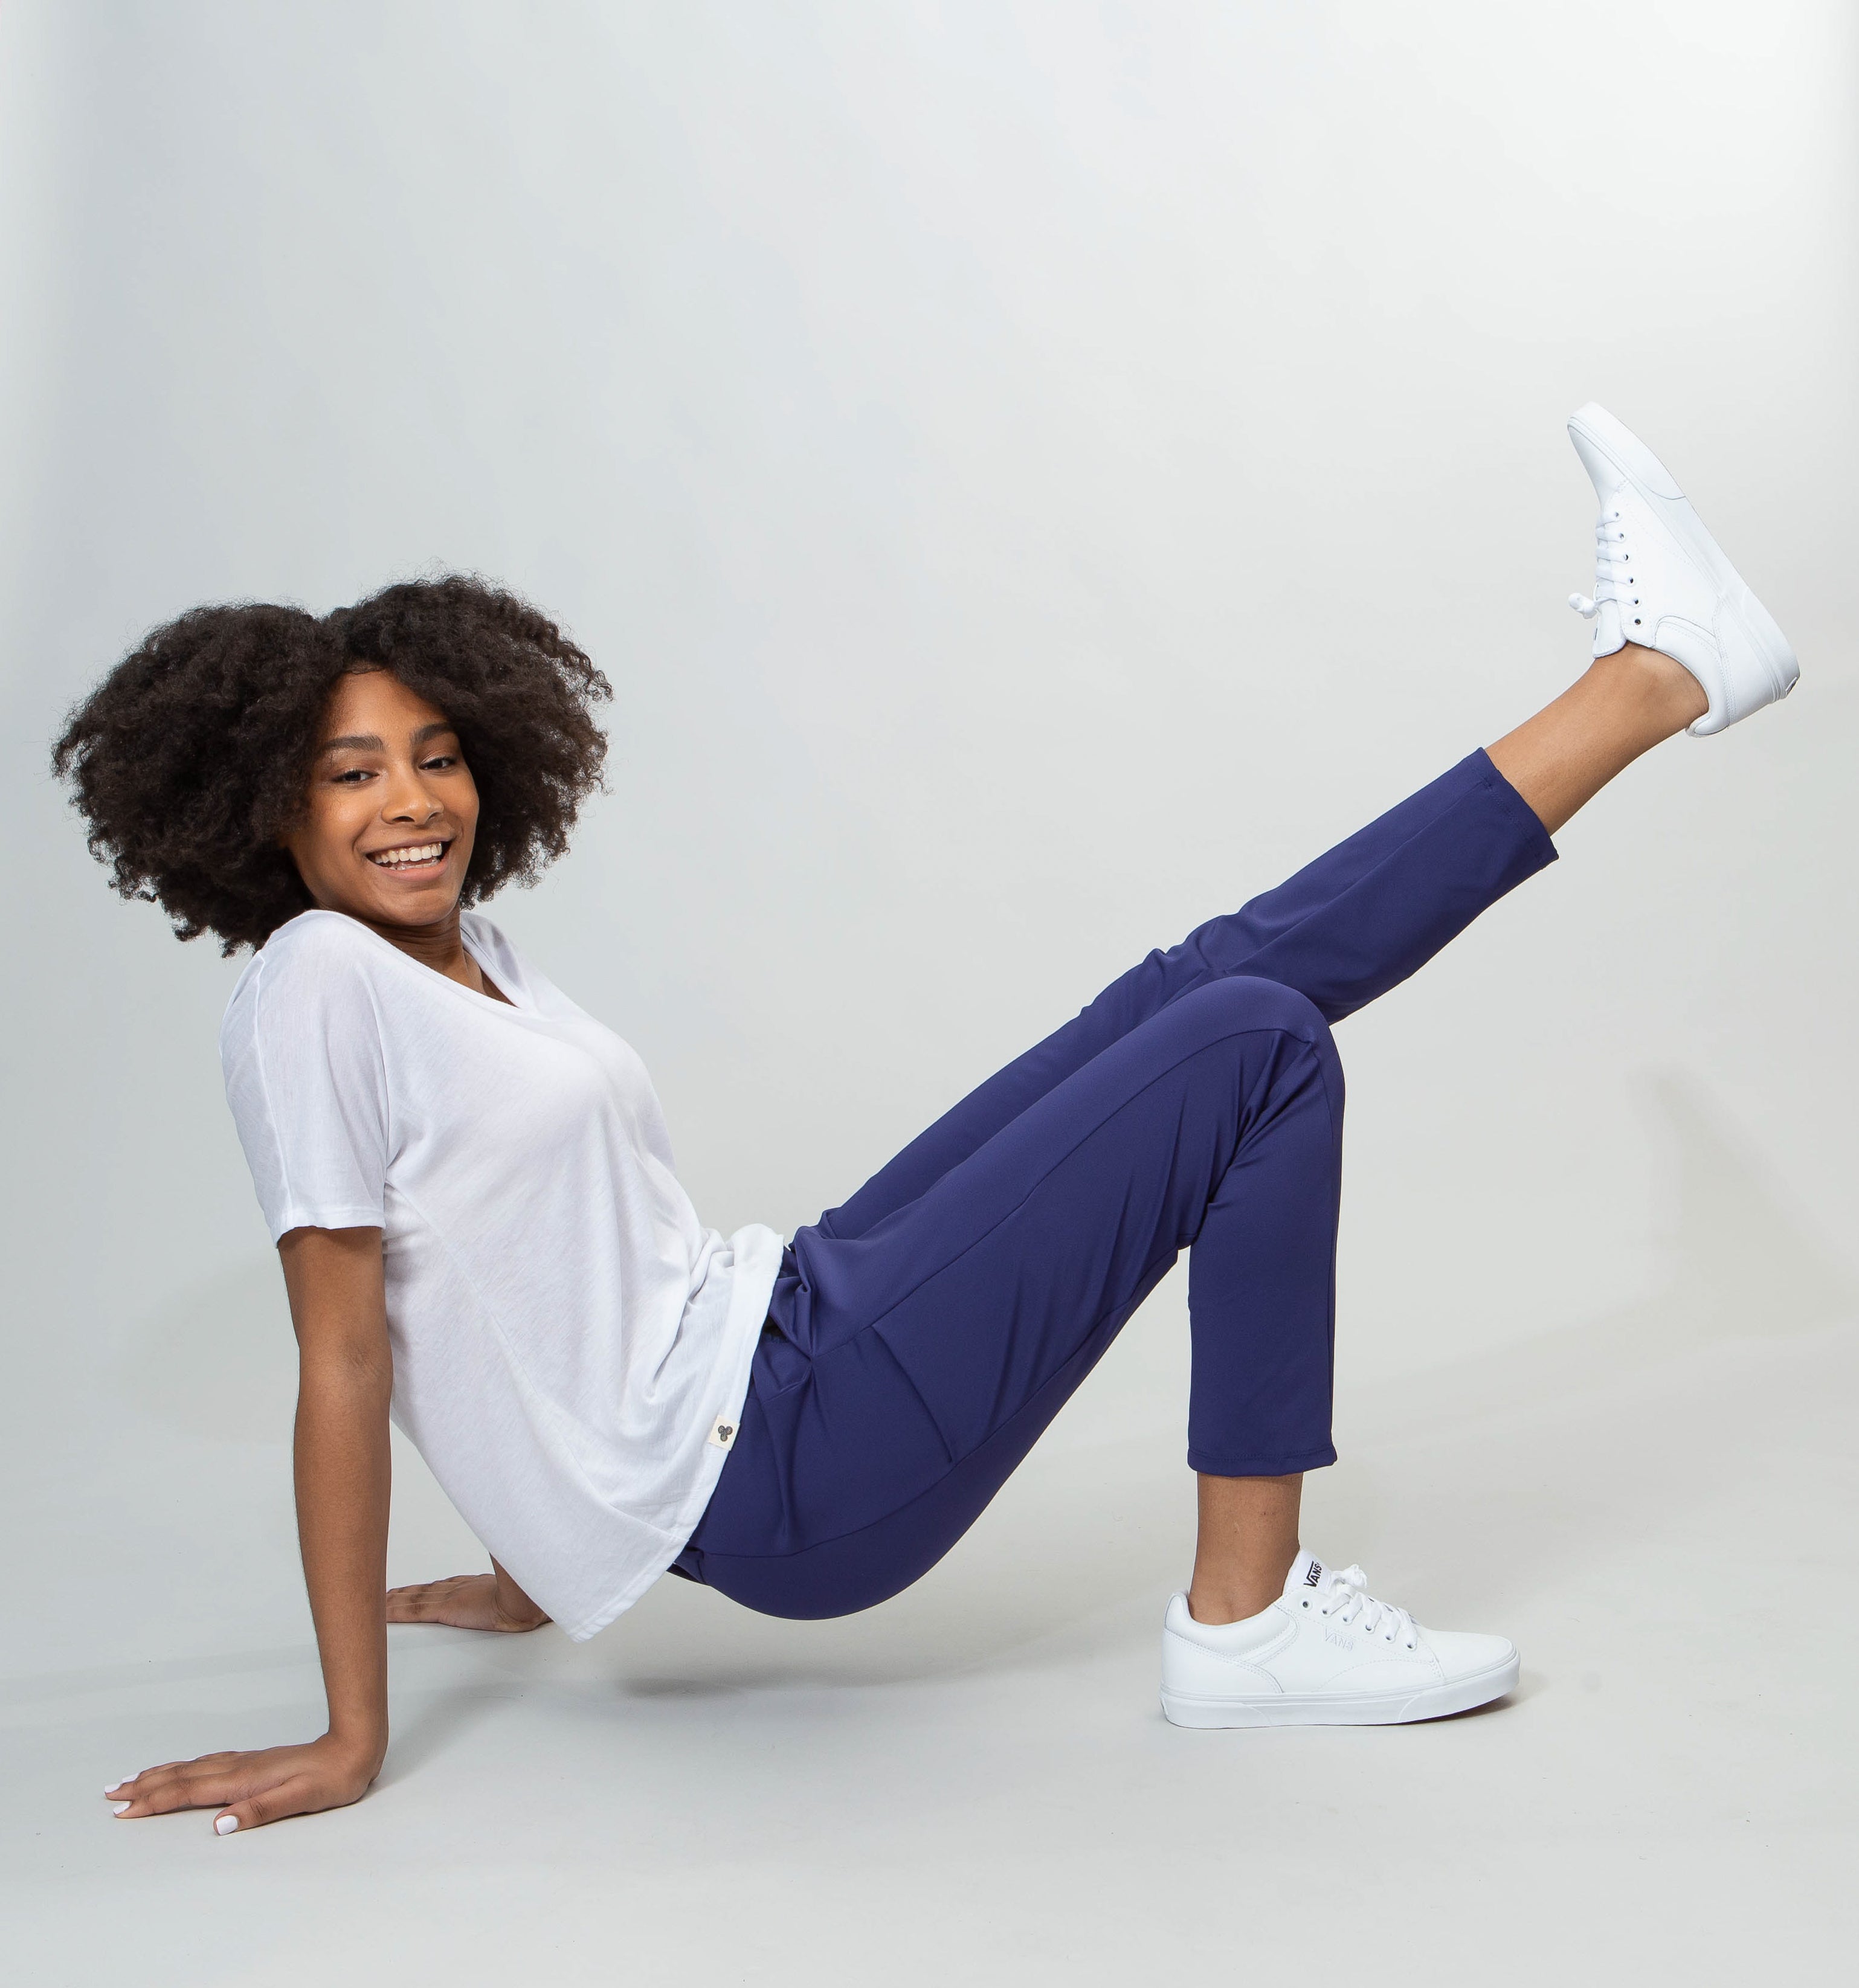 African American model smiling at us, postured on the ground arms behind and palms down, one leg up in the air.  She has a white shirt and blue pants.